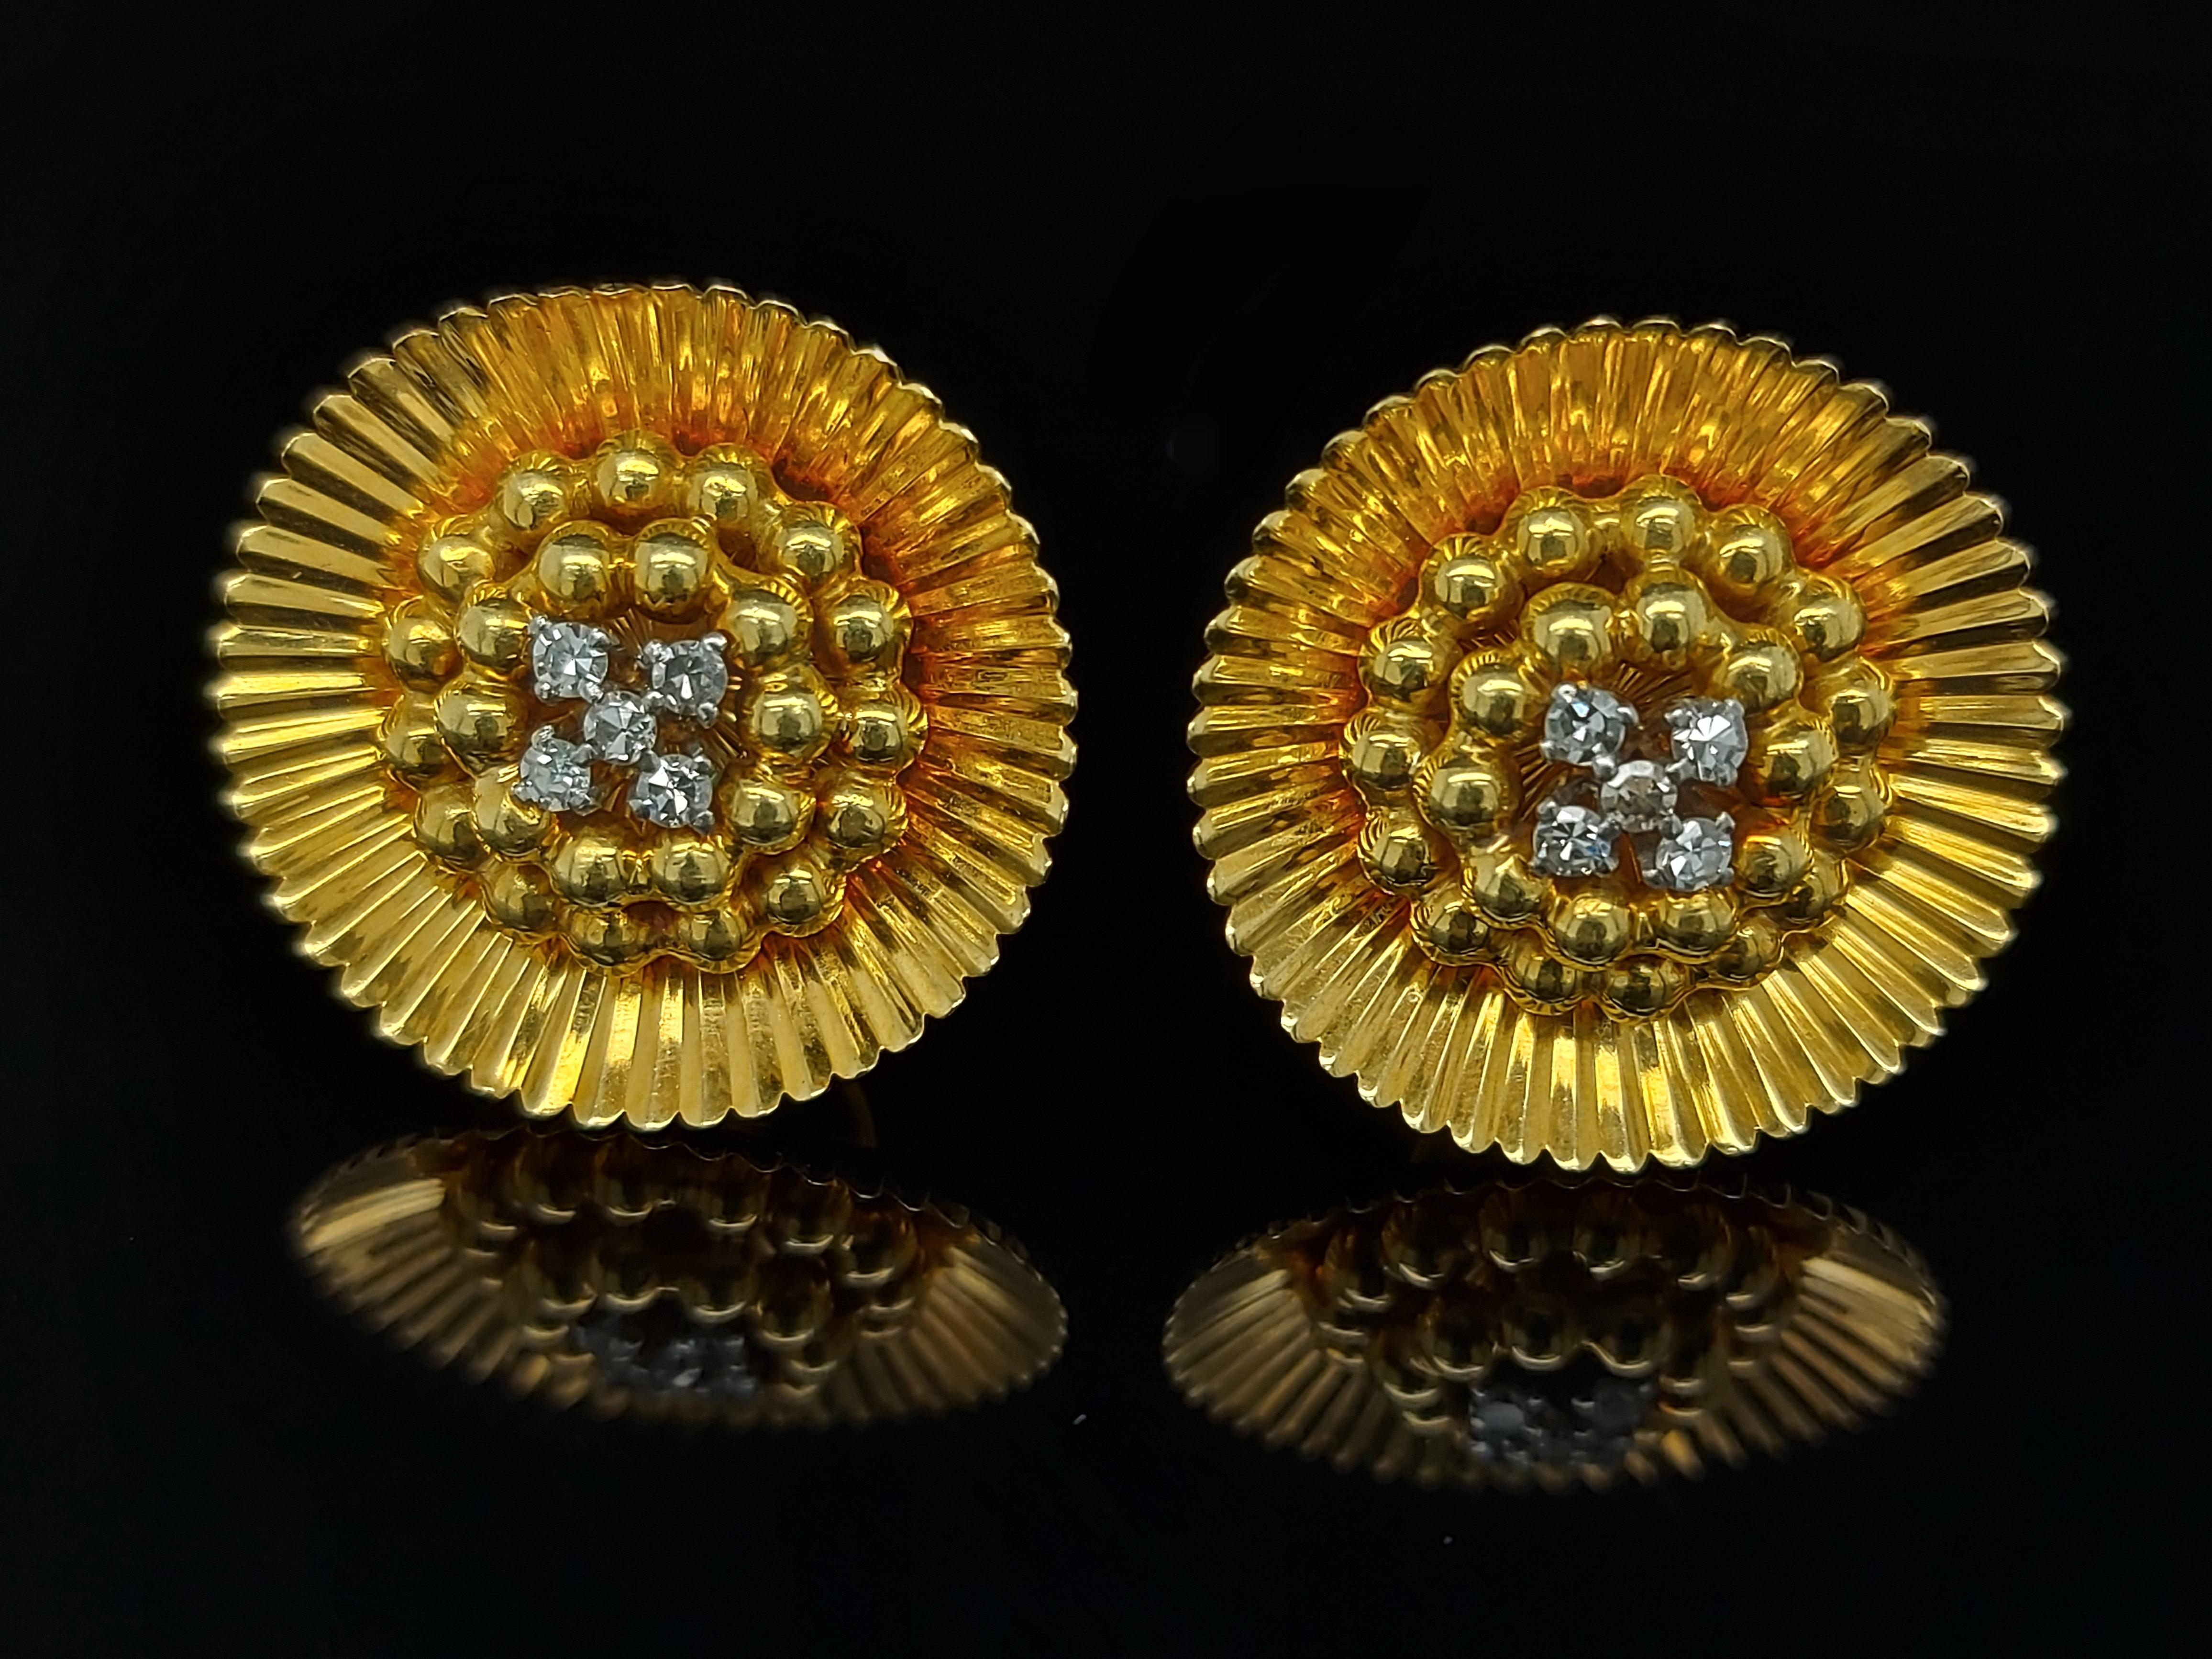 18 Kt Yellow Gold Clip- On Flower Shape Earrings 8/8 Cut Diamonds 0.26 ct.

Elegant clip-on flower shape earrings.

These clip - on earrings can be converted to earrings for your pierced ears upon request.
 
Diamonds: They are 8/8 cut diamonds and